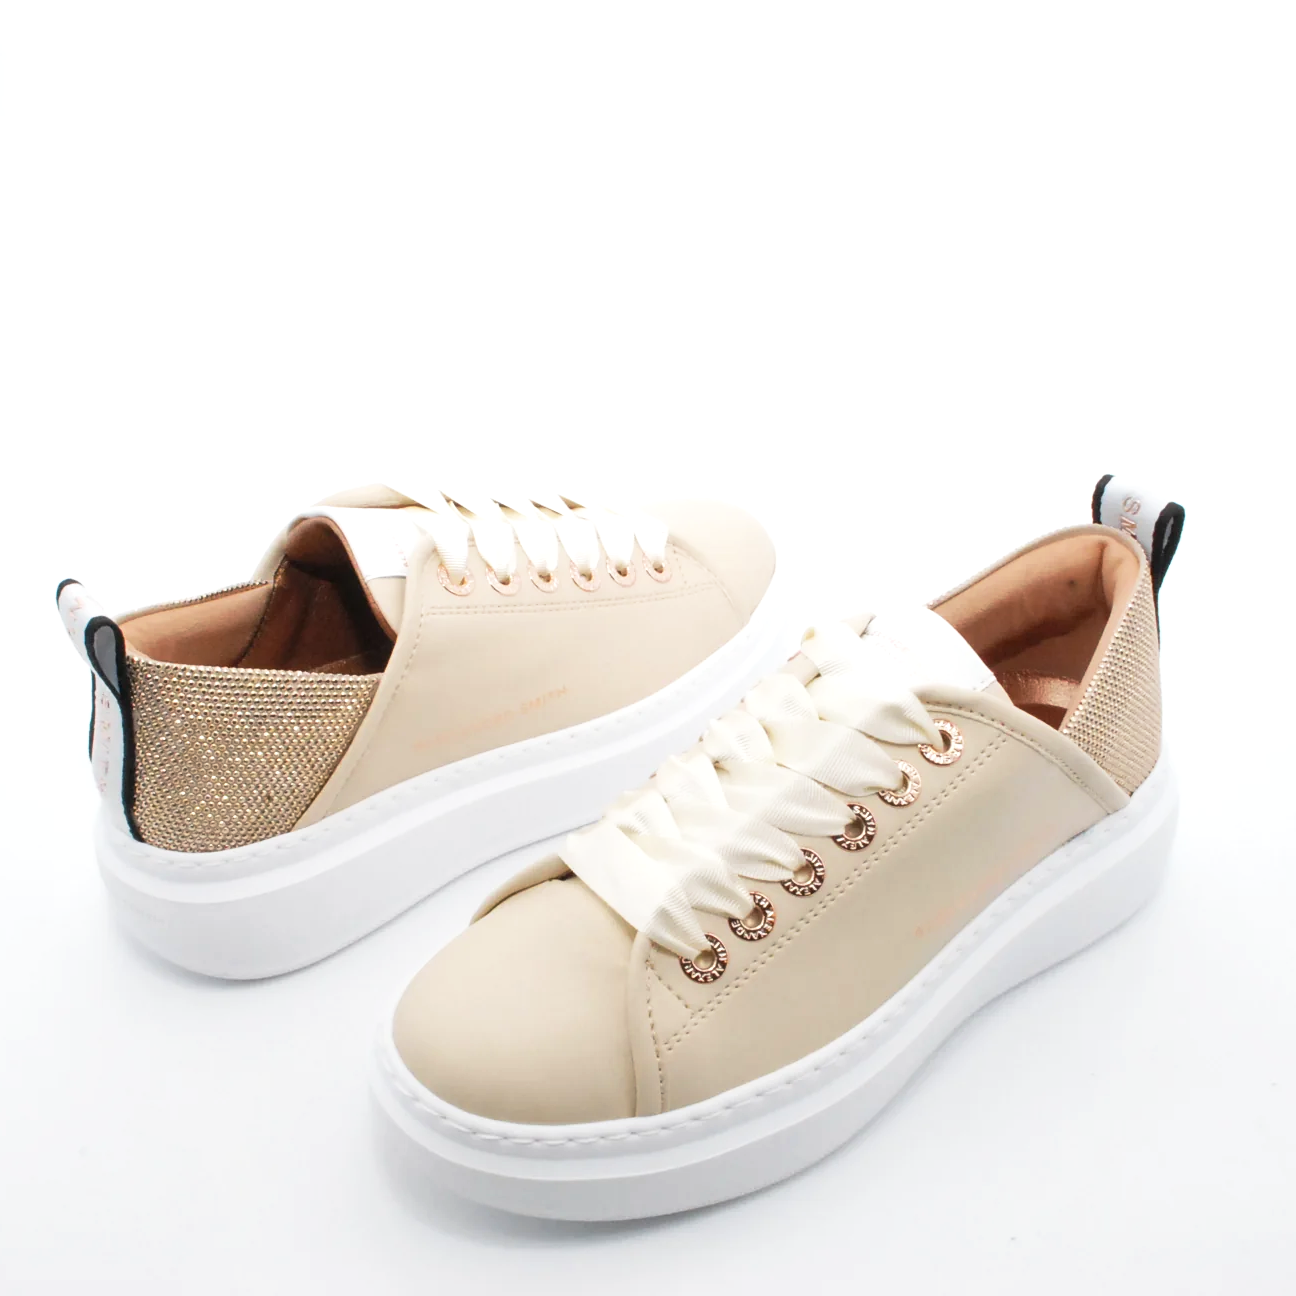 sneakers-alexander-smith-wembley-in-pelle-sneakers-2_1f239d3b-3626-4801-9e9b-92e640bb0e76.png